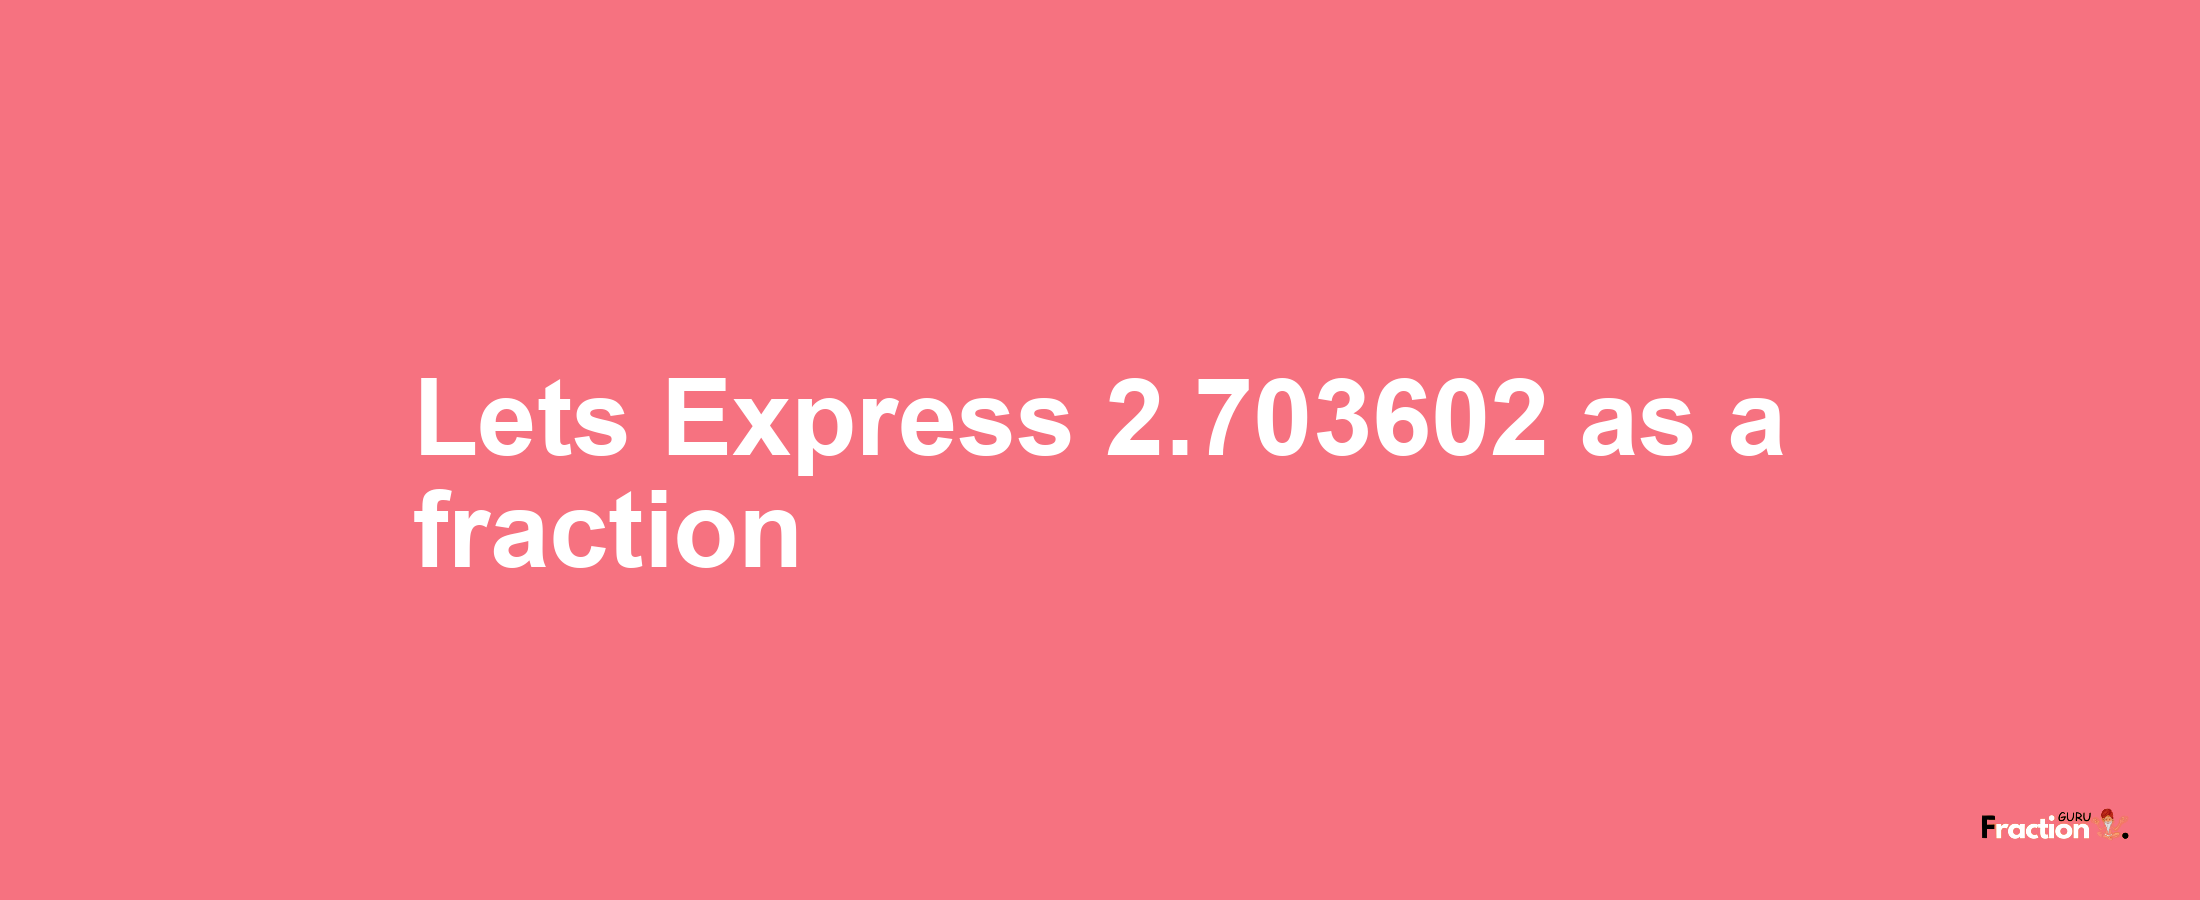 Lets Express 2.703602 as afraction